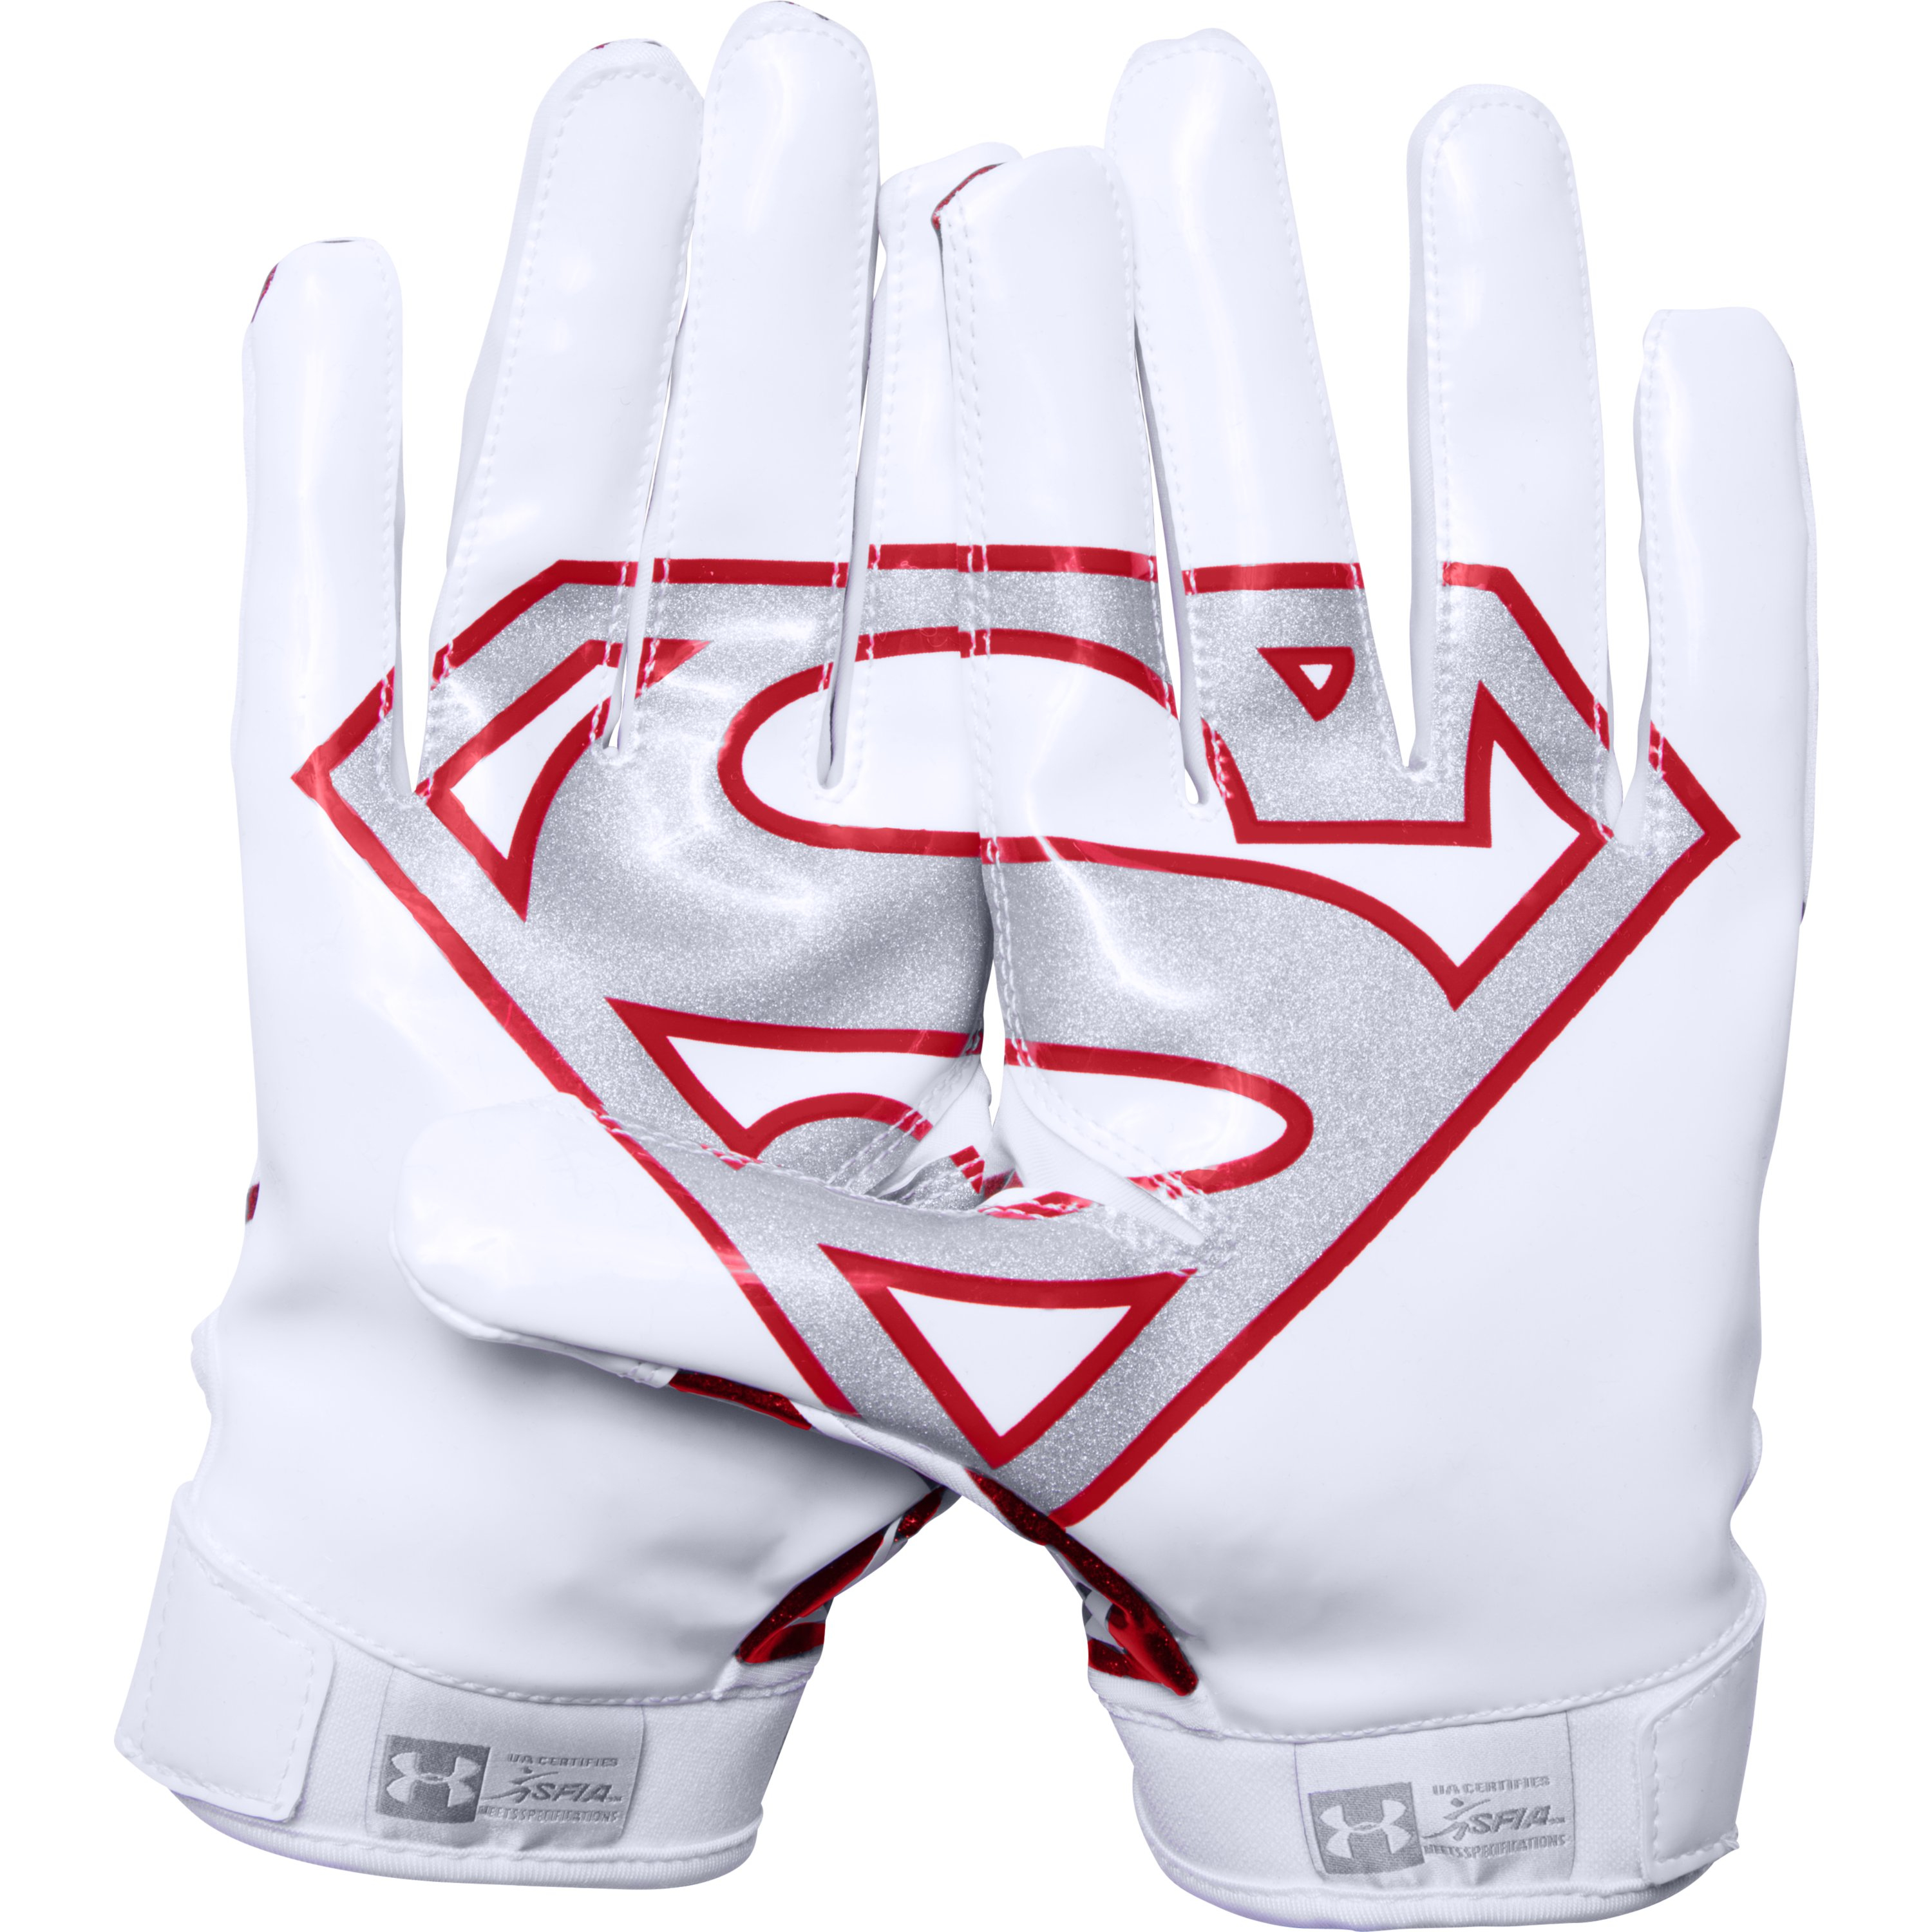 Under Armour Men's ® Alter Ego Superman F5 Football Gloves in White/Red ...